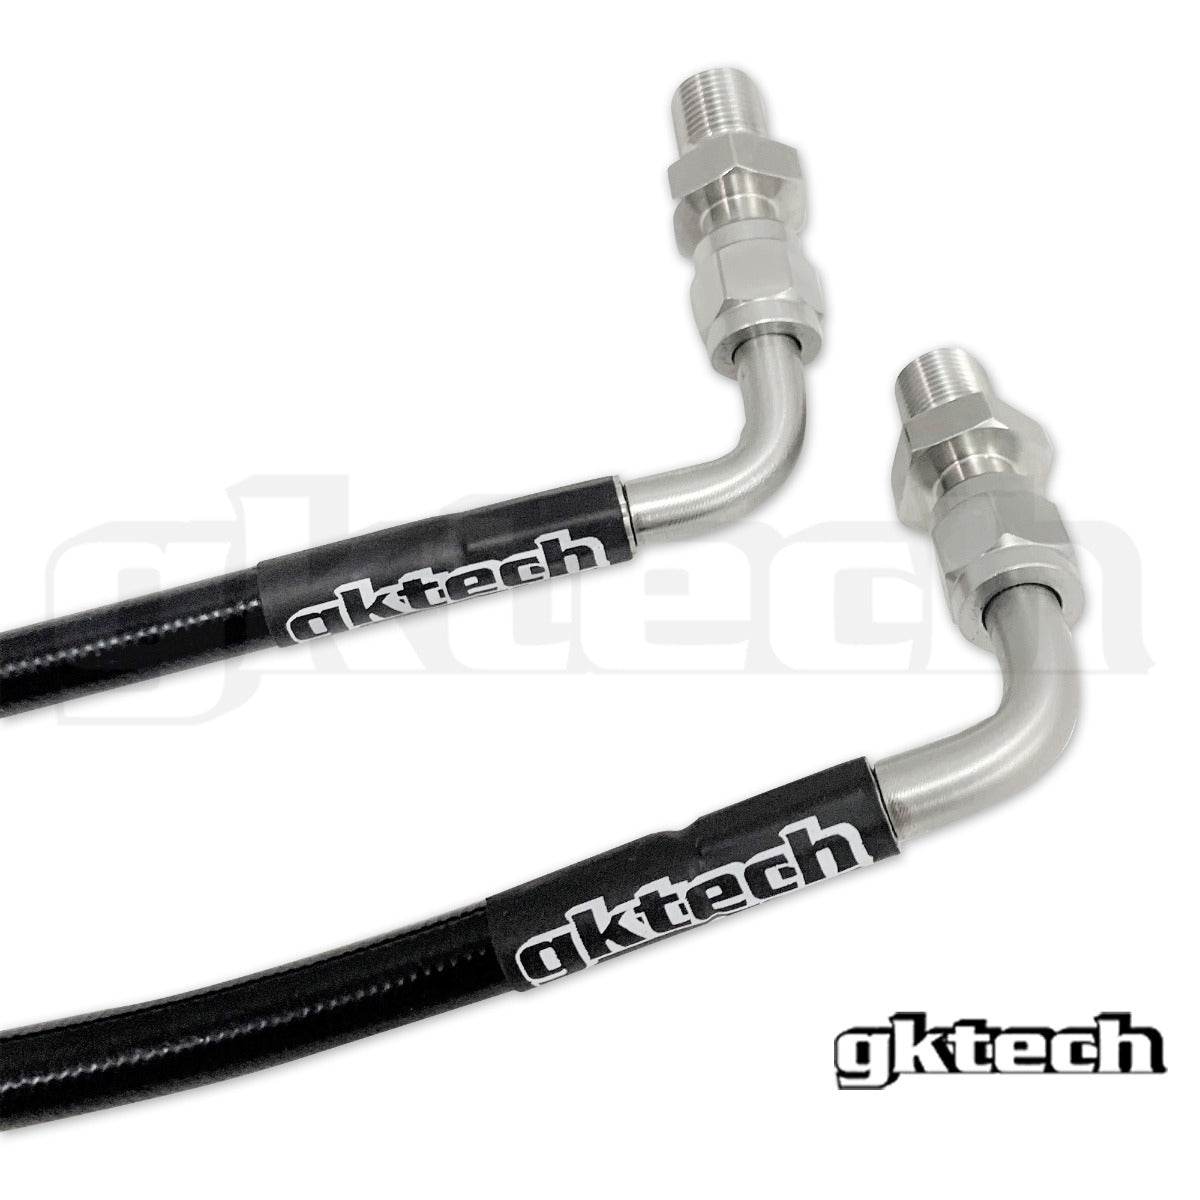 240sx/Silvia power steering hard line replacements (pair)